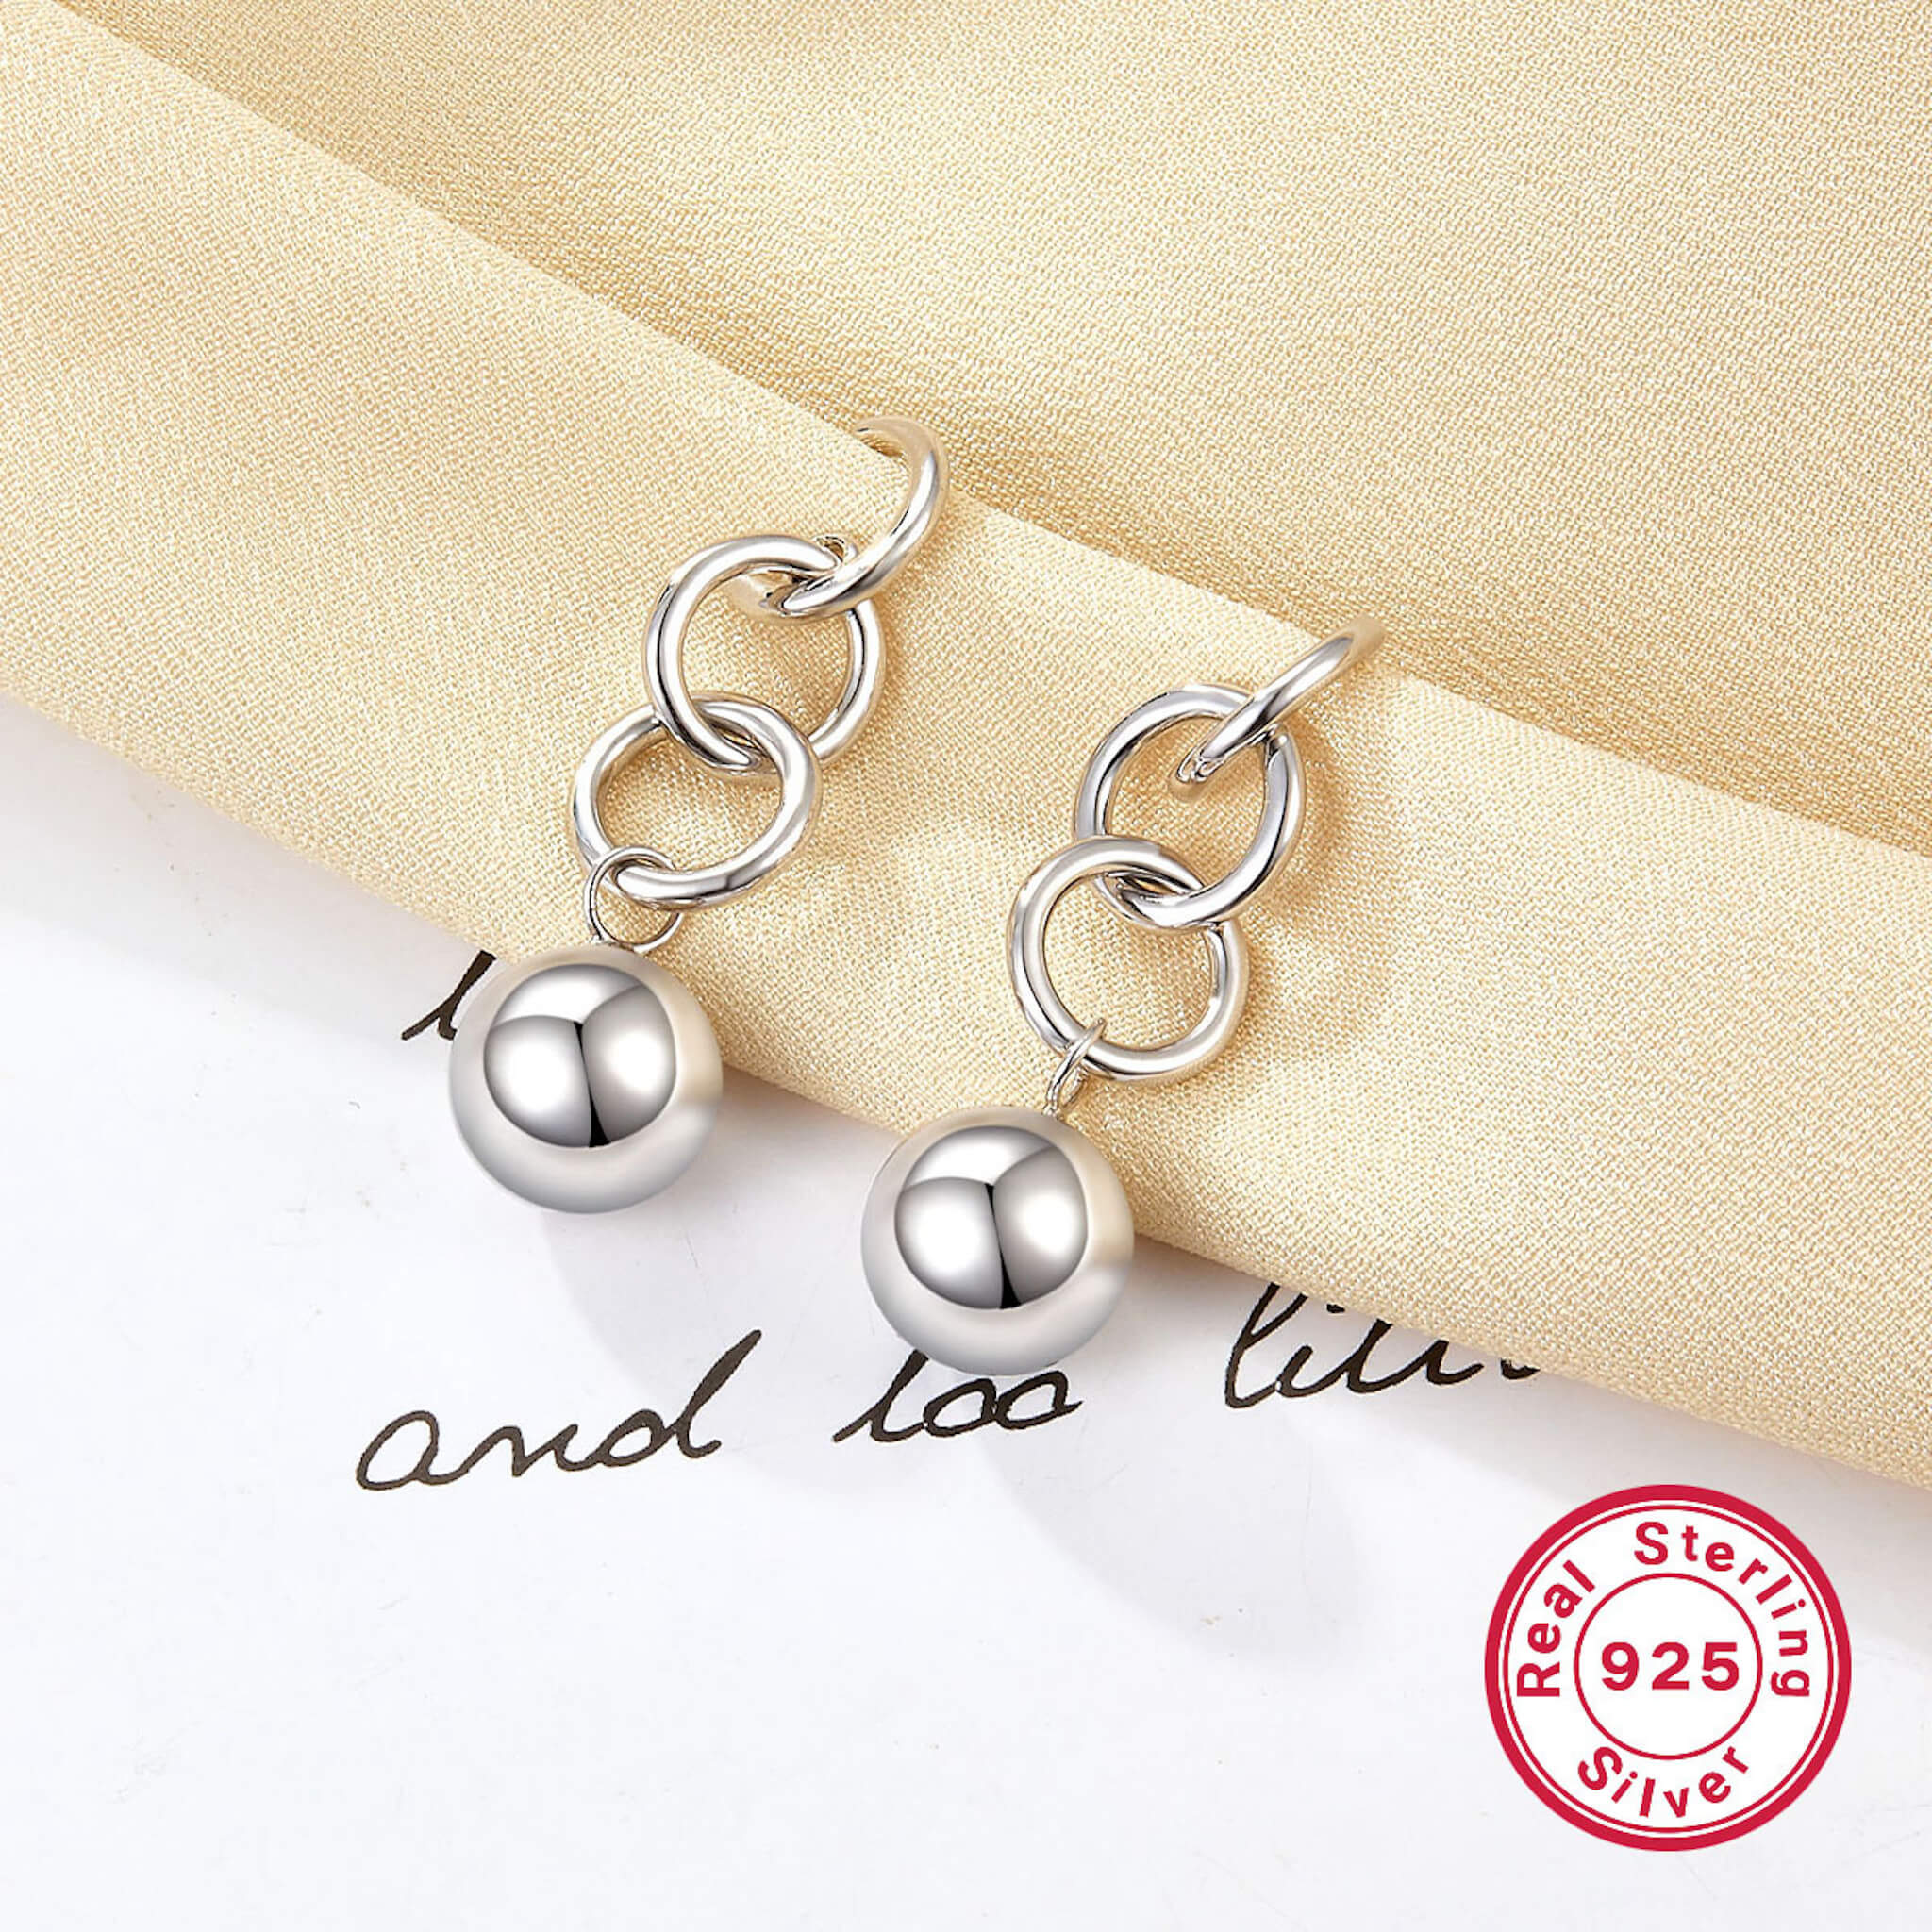 925 Sterling Silver Women's Double Circle Silver Bead Stud Earrings  UponBasics   